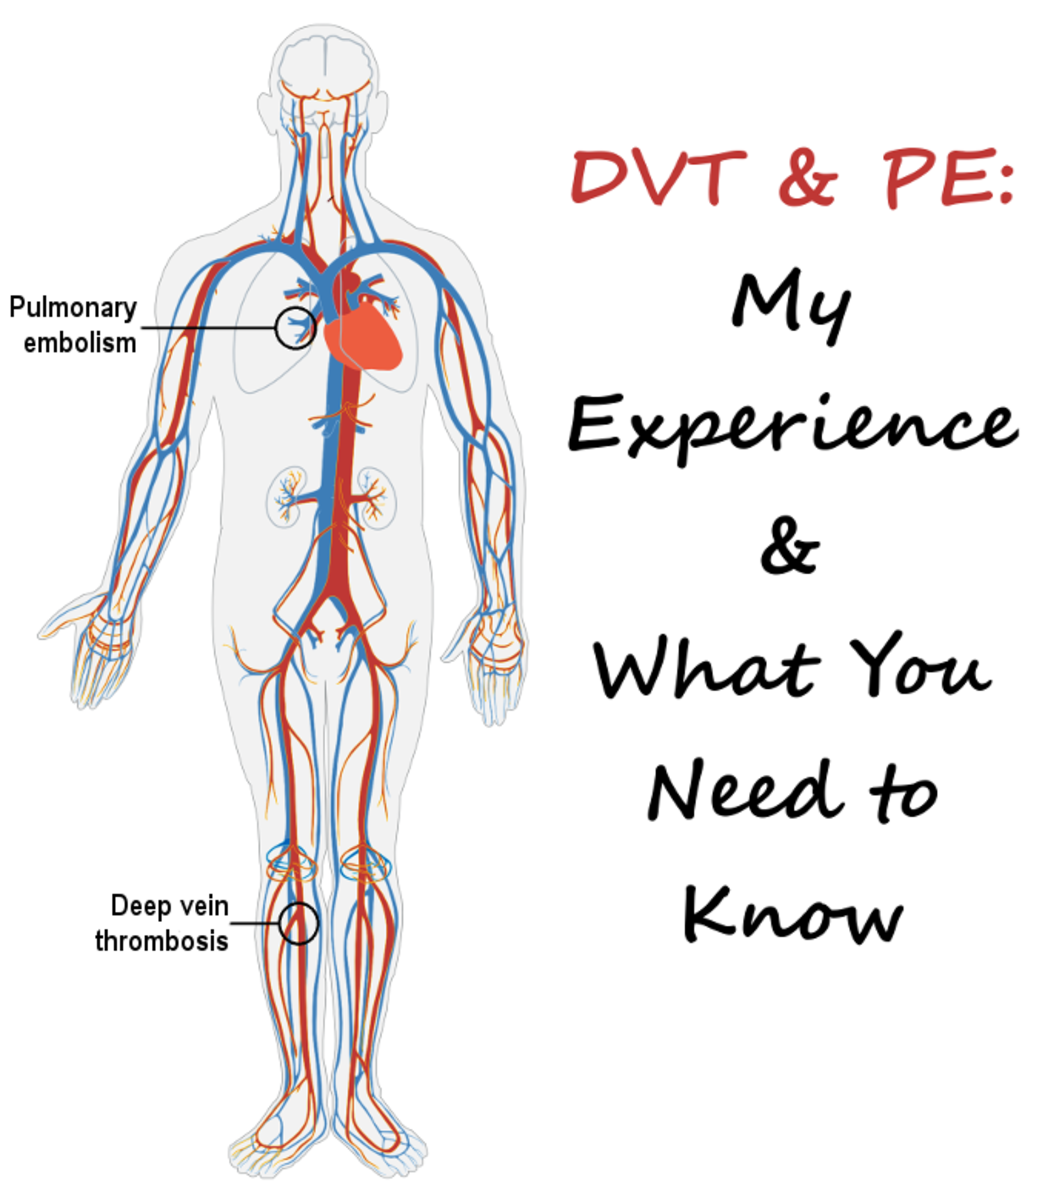 DVT and PE: Causes, Symptoms, Treatment, and Prophylaxis